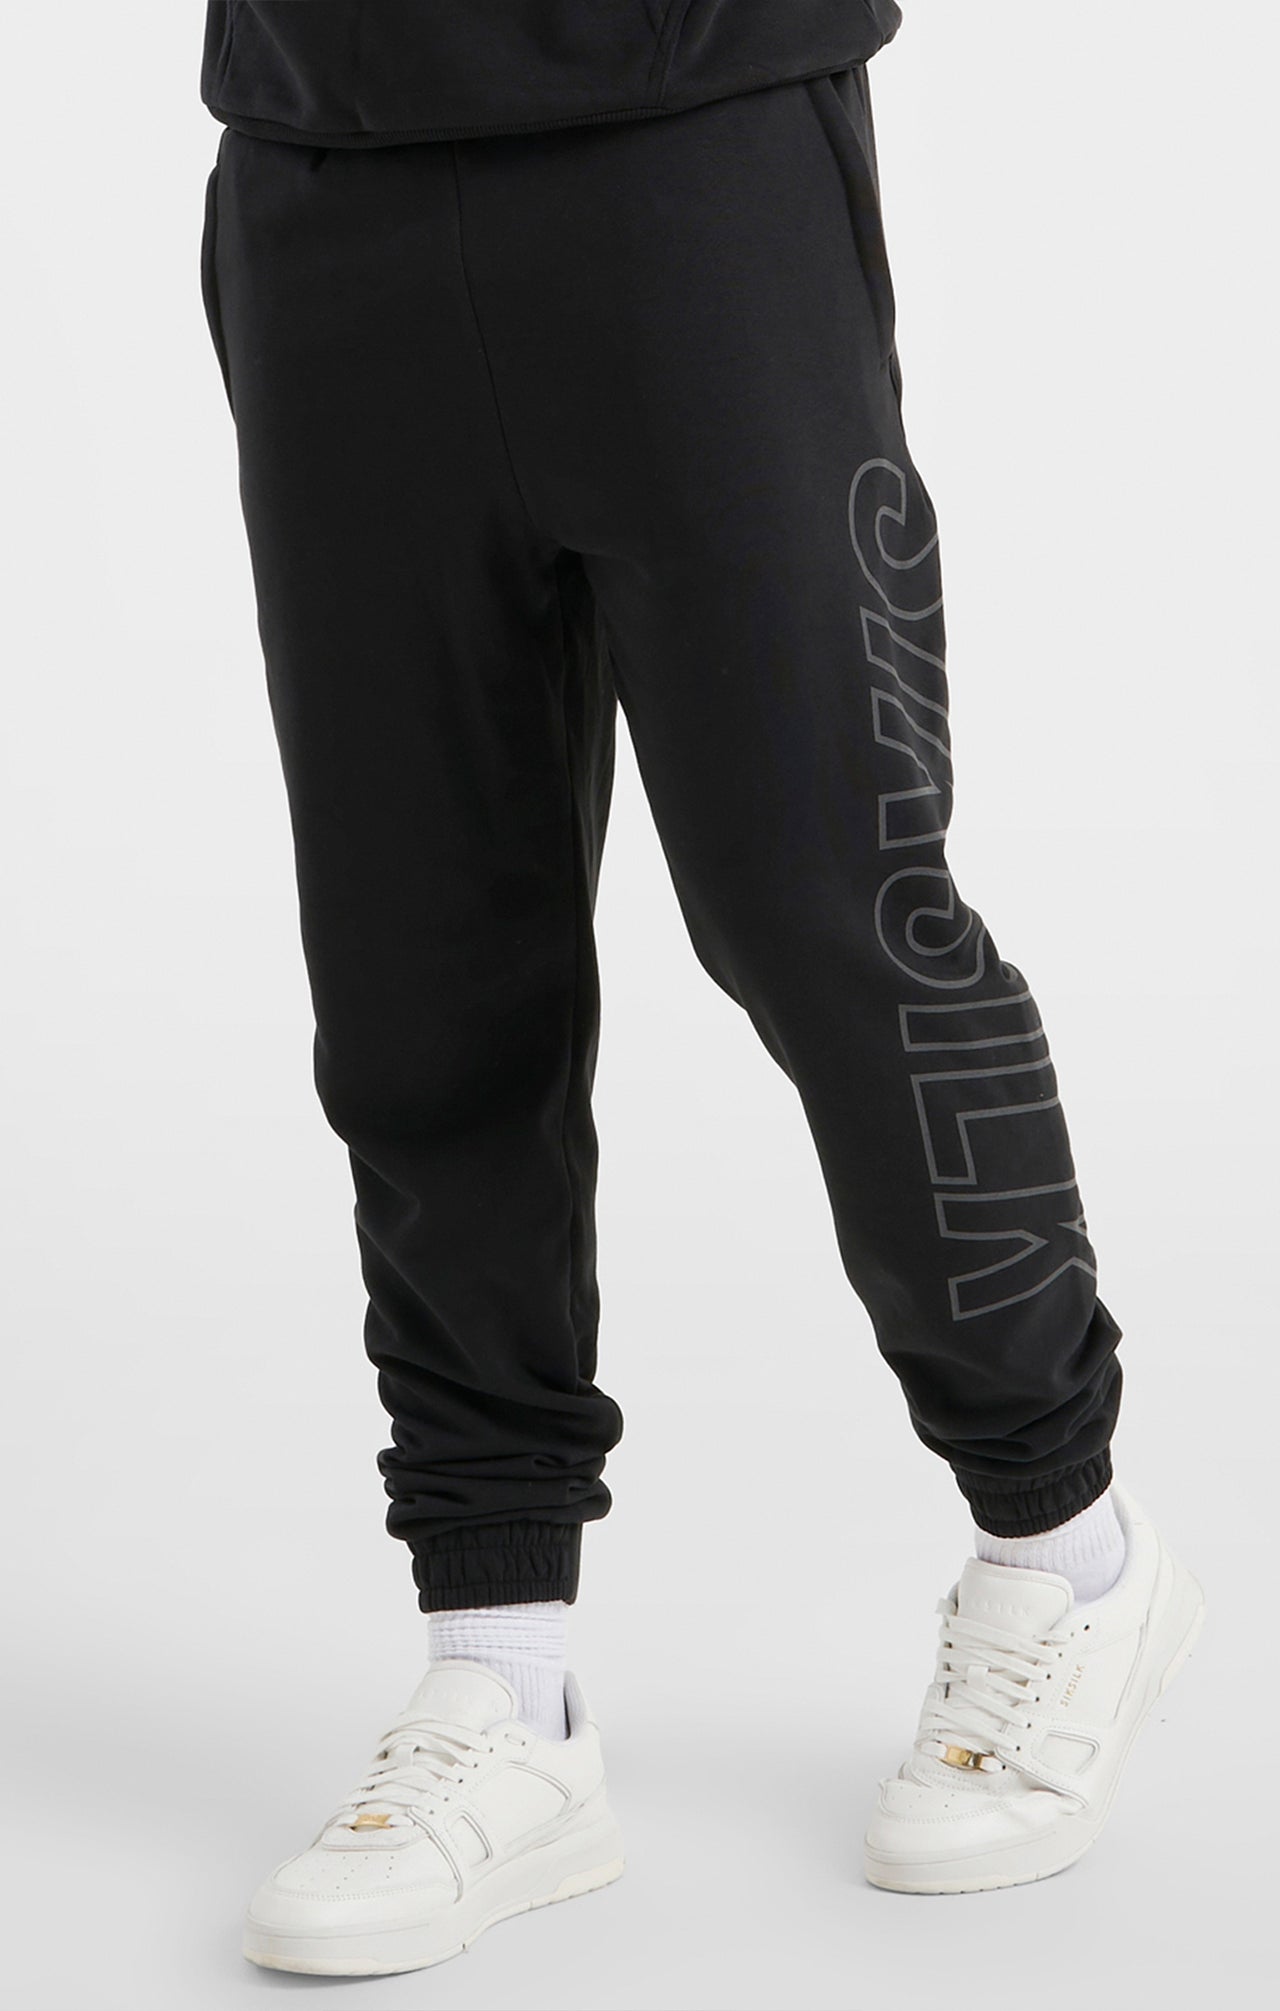 Black Sports Relaxed Fit Large Branding Pant (1)